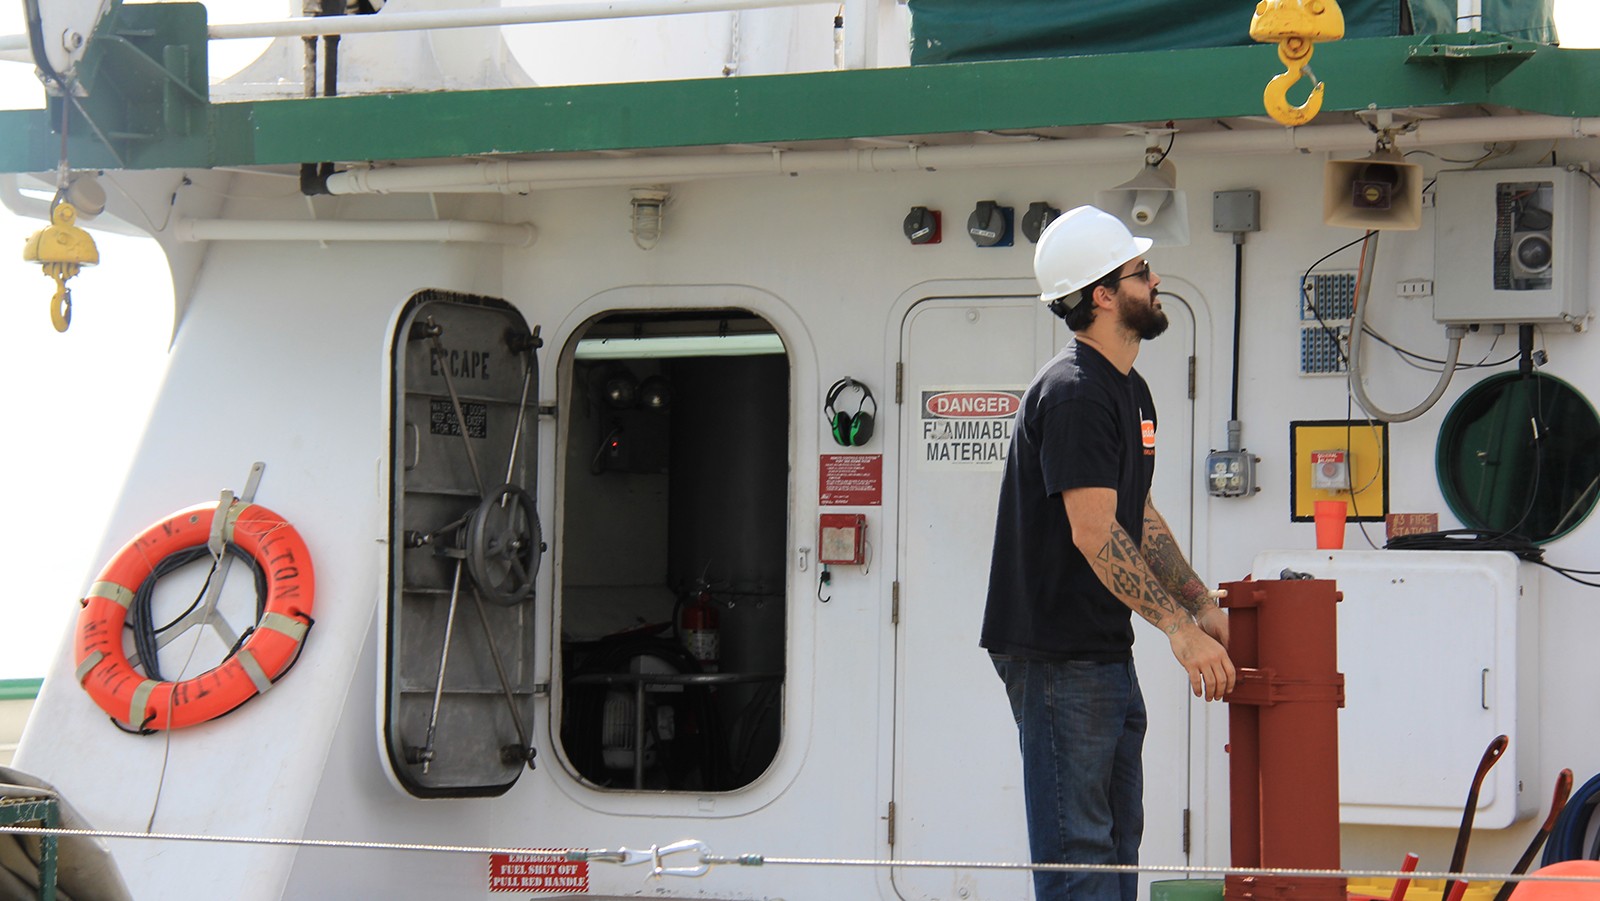 Grant Rawson stabilizes the equipment as it is loaded onto the R/V F.G. Walton Smith. Image Credit: NOAA